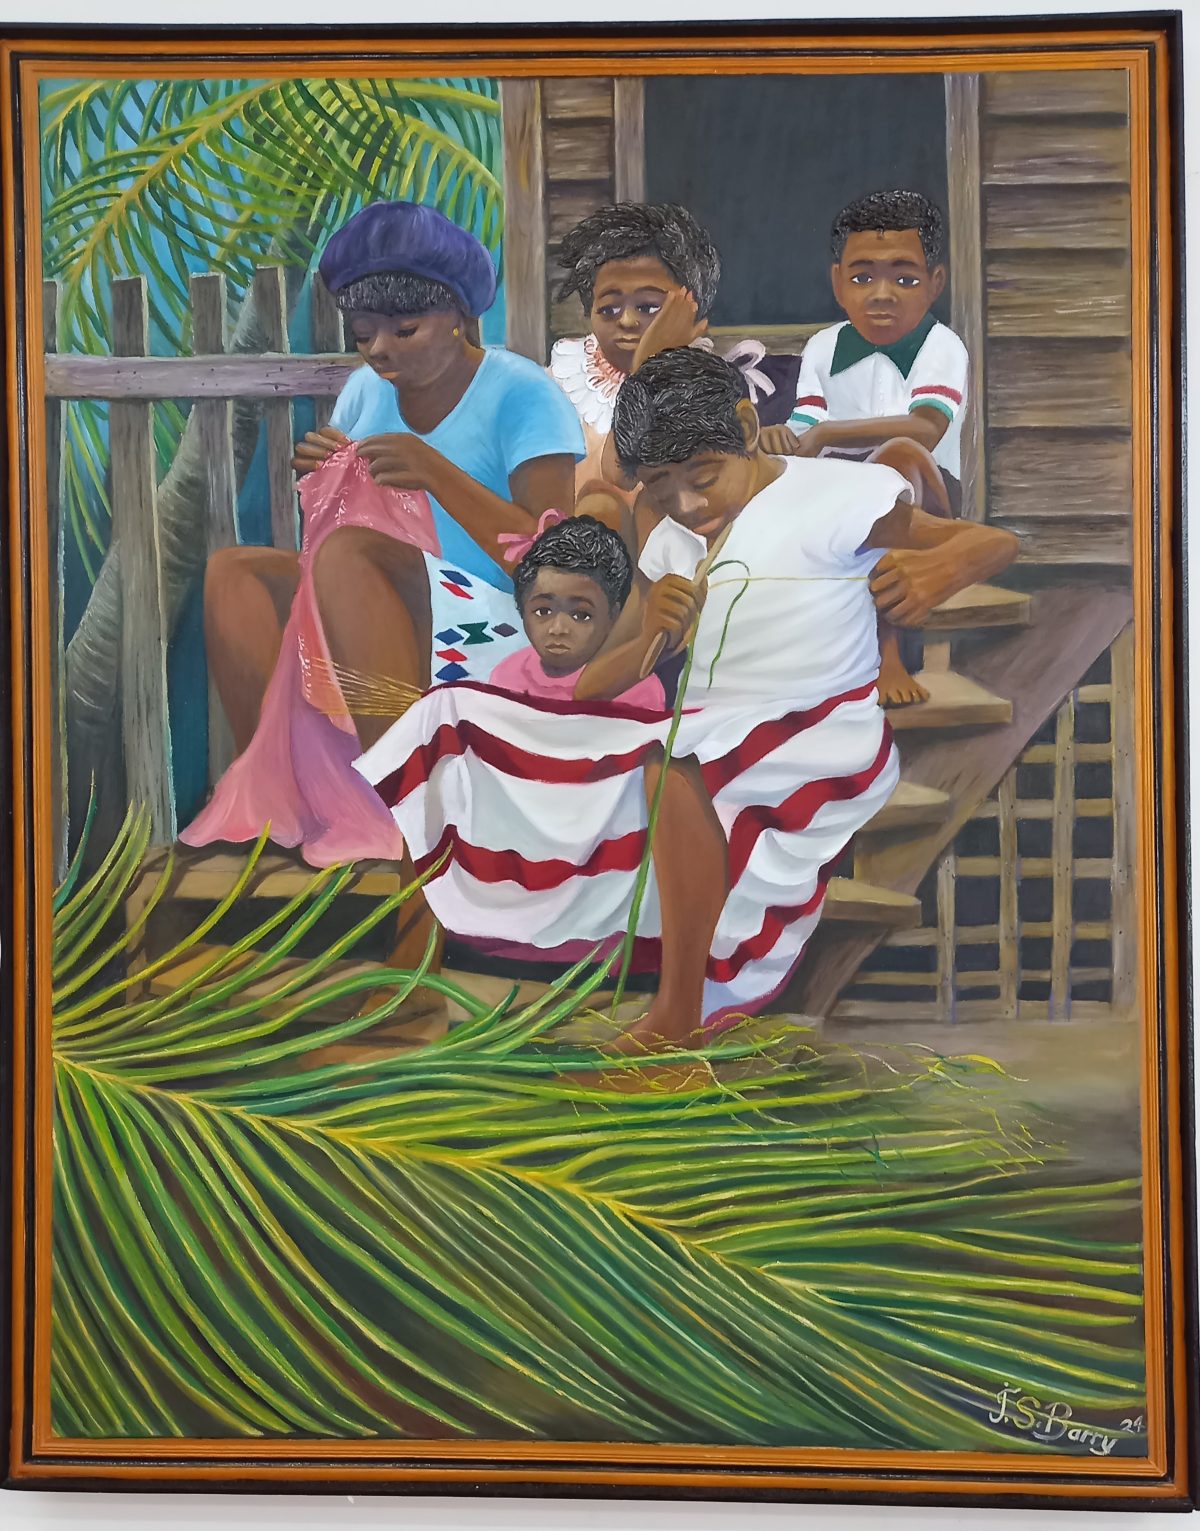 Jerry Barry: Sunday Morning Chores (Oil on Canvas; Photo credit: A McPherson with permission of the NGA)